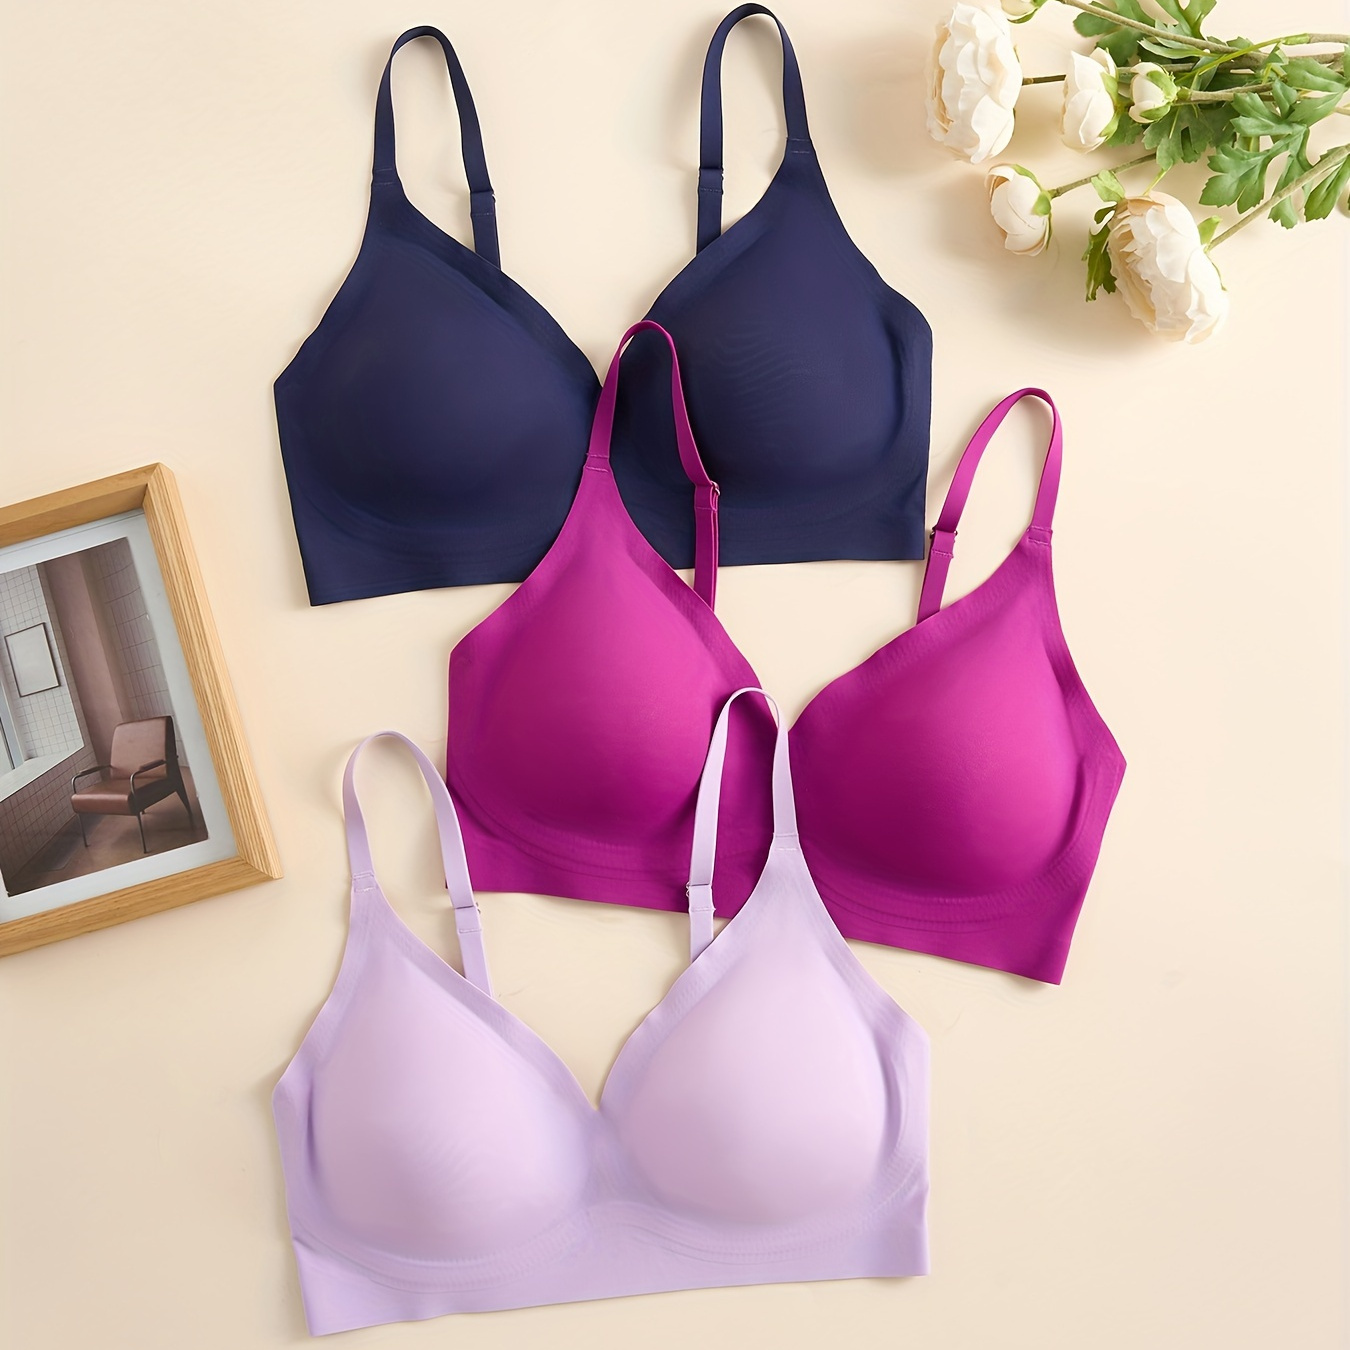 

3-pack Seamless Wireless Bras For Women, V-neck Basic Style Solid Colored , Comfort Fit Bralette Set – Navy, Pink, Lavender